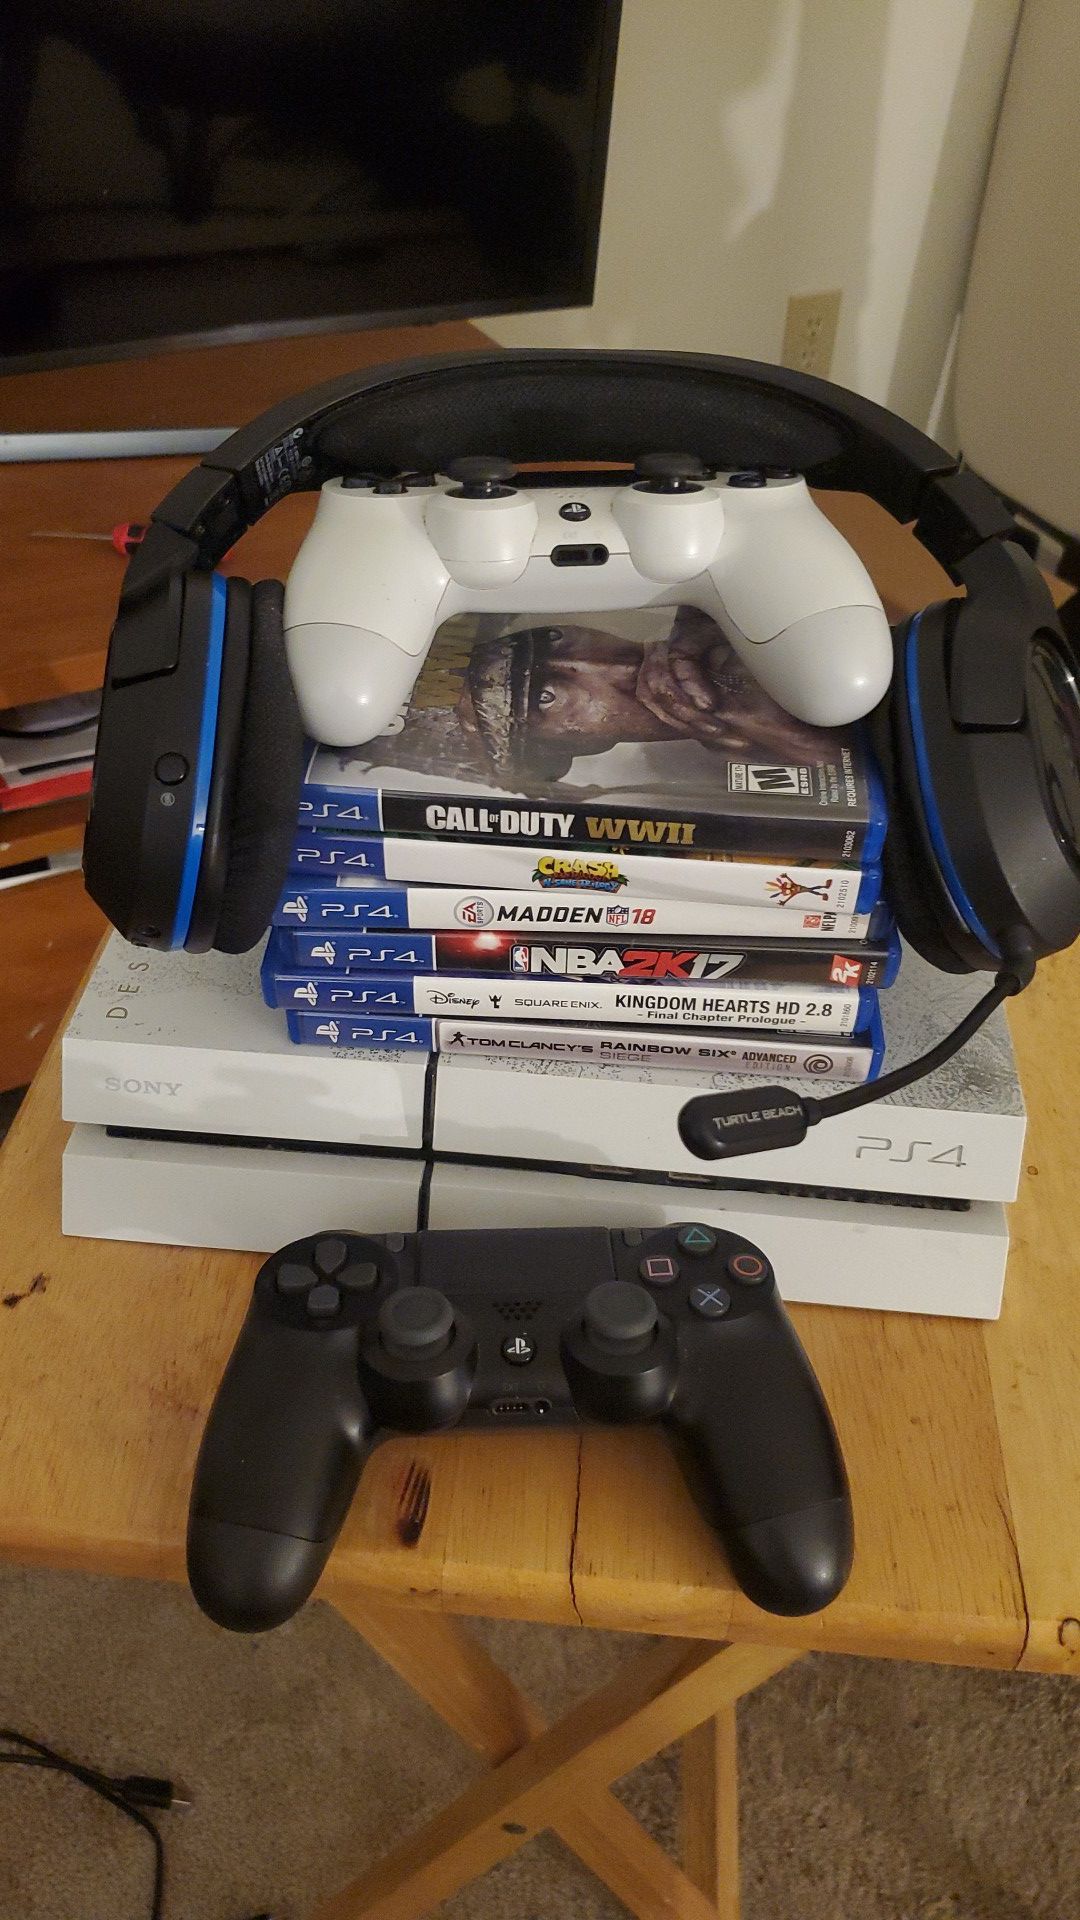 PS4 500GB Destiny edition with Turtle Beach headset, a few games and 2 controllers for 300.